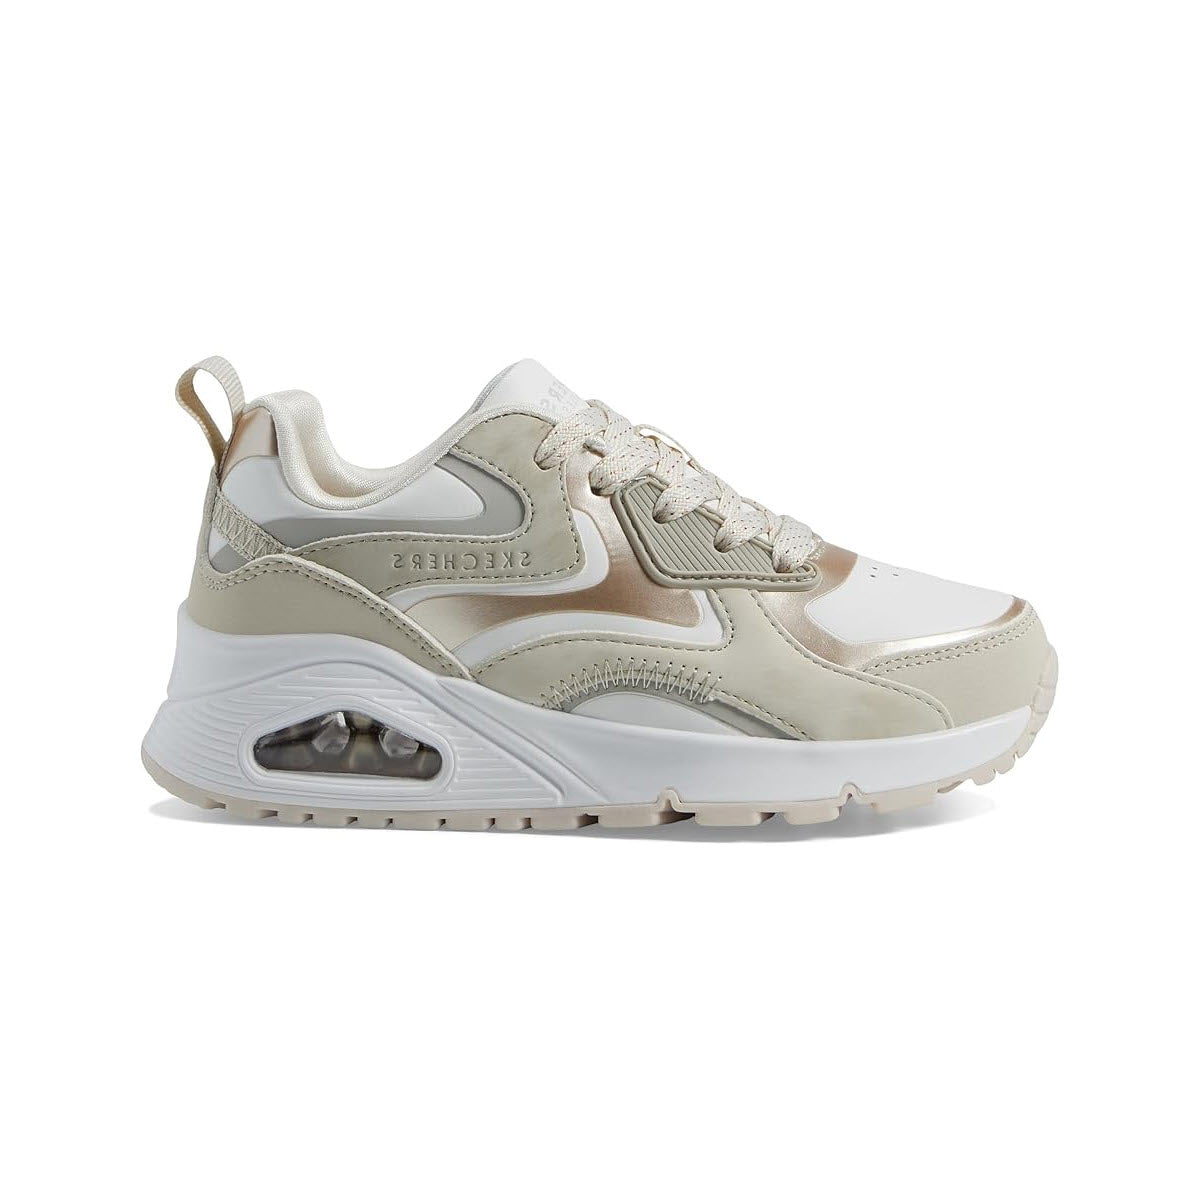 A beige Skechers UNO Gen 1 Color Surge Natural sneaker with a chunky white Skech-Air midsole and visible air cushion in the heel, displayed on a white background.